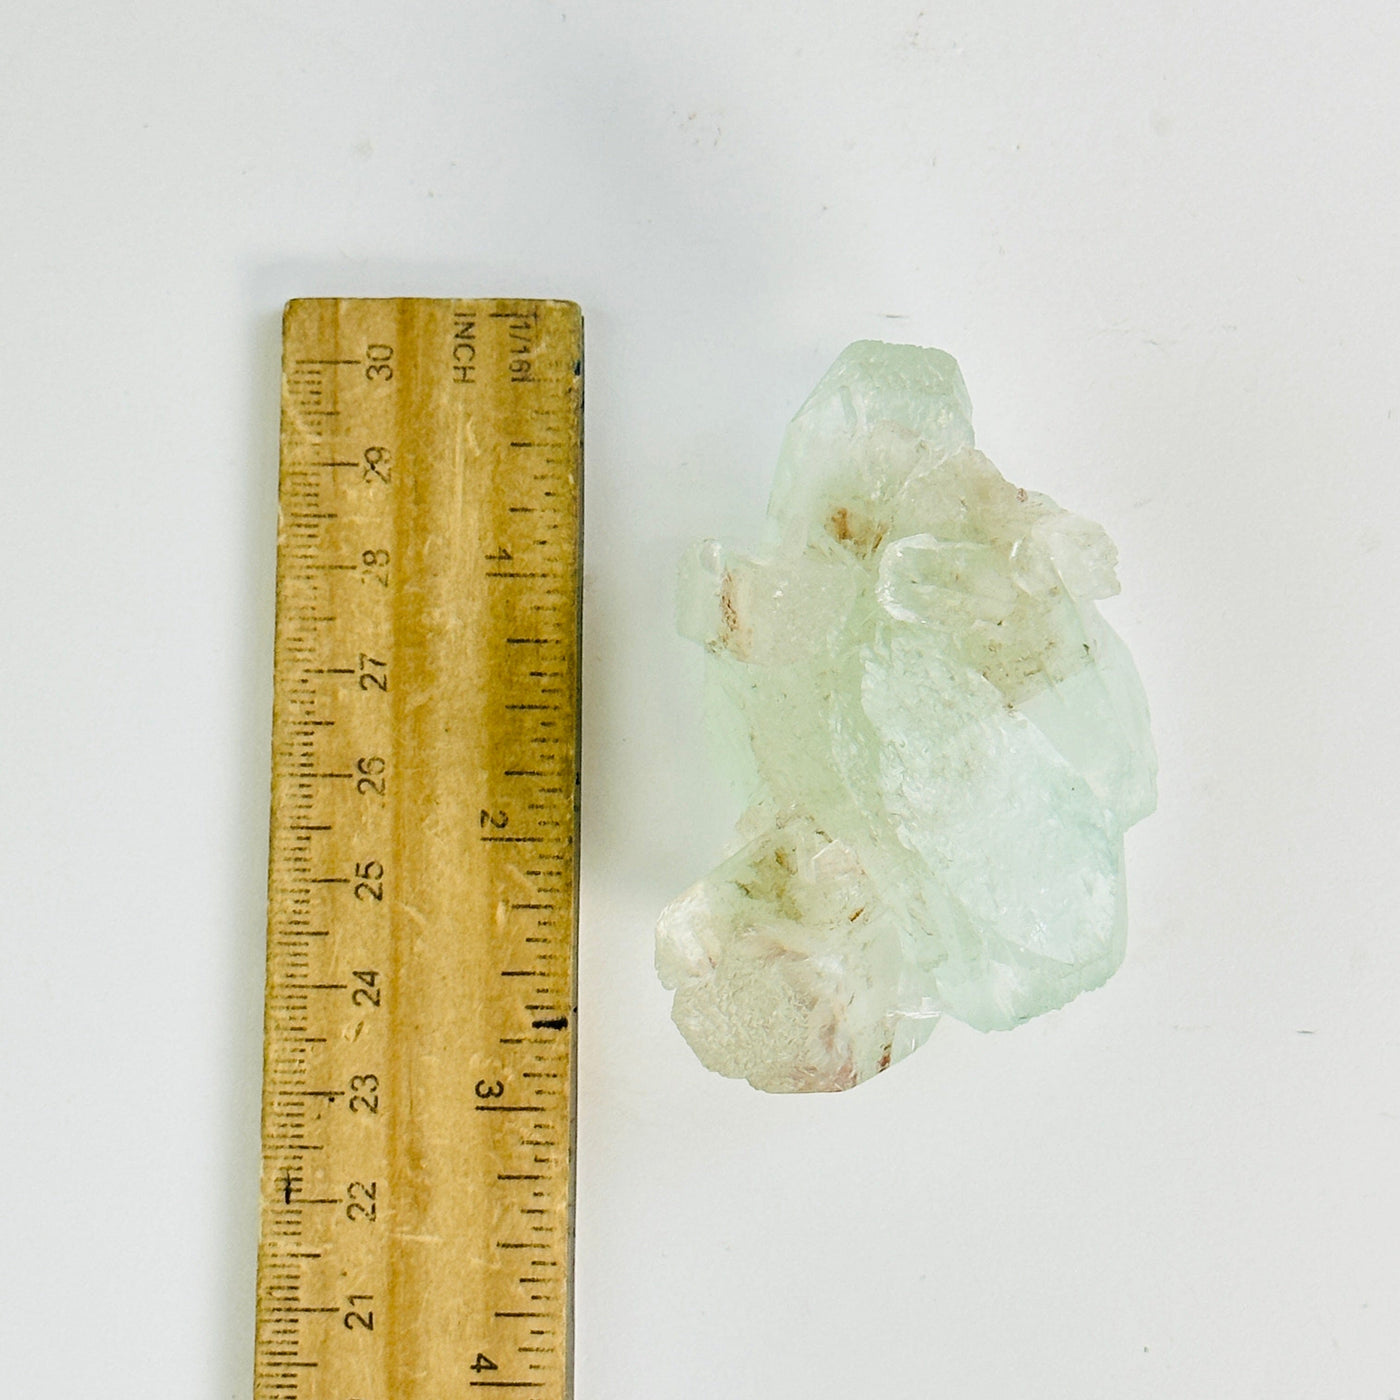 green apophyllite with stilbite cluster next to a ruler for size reference